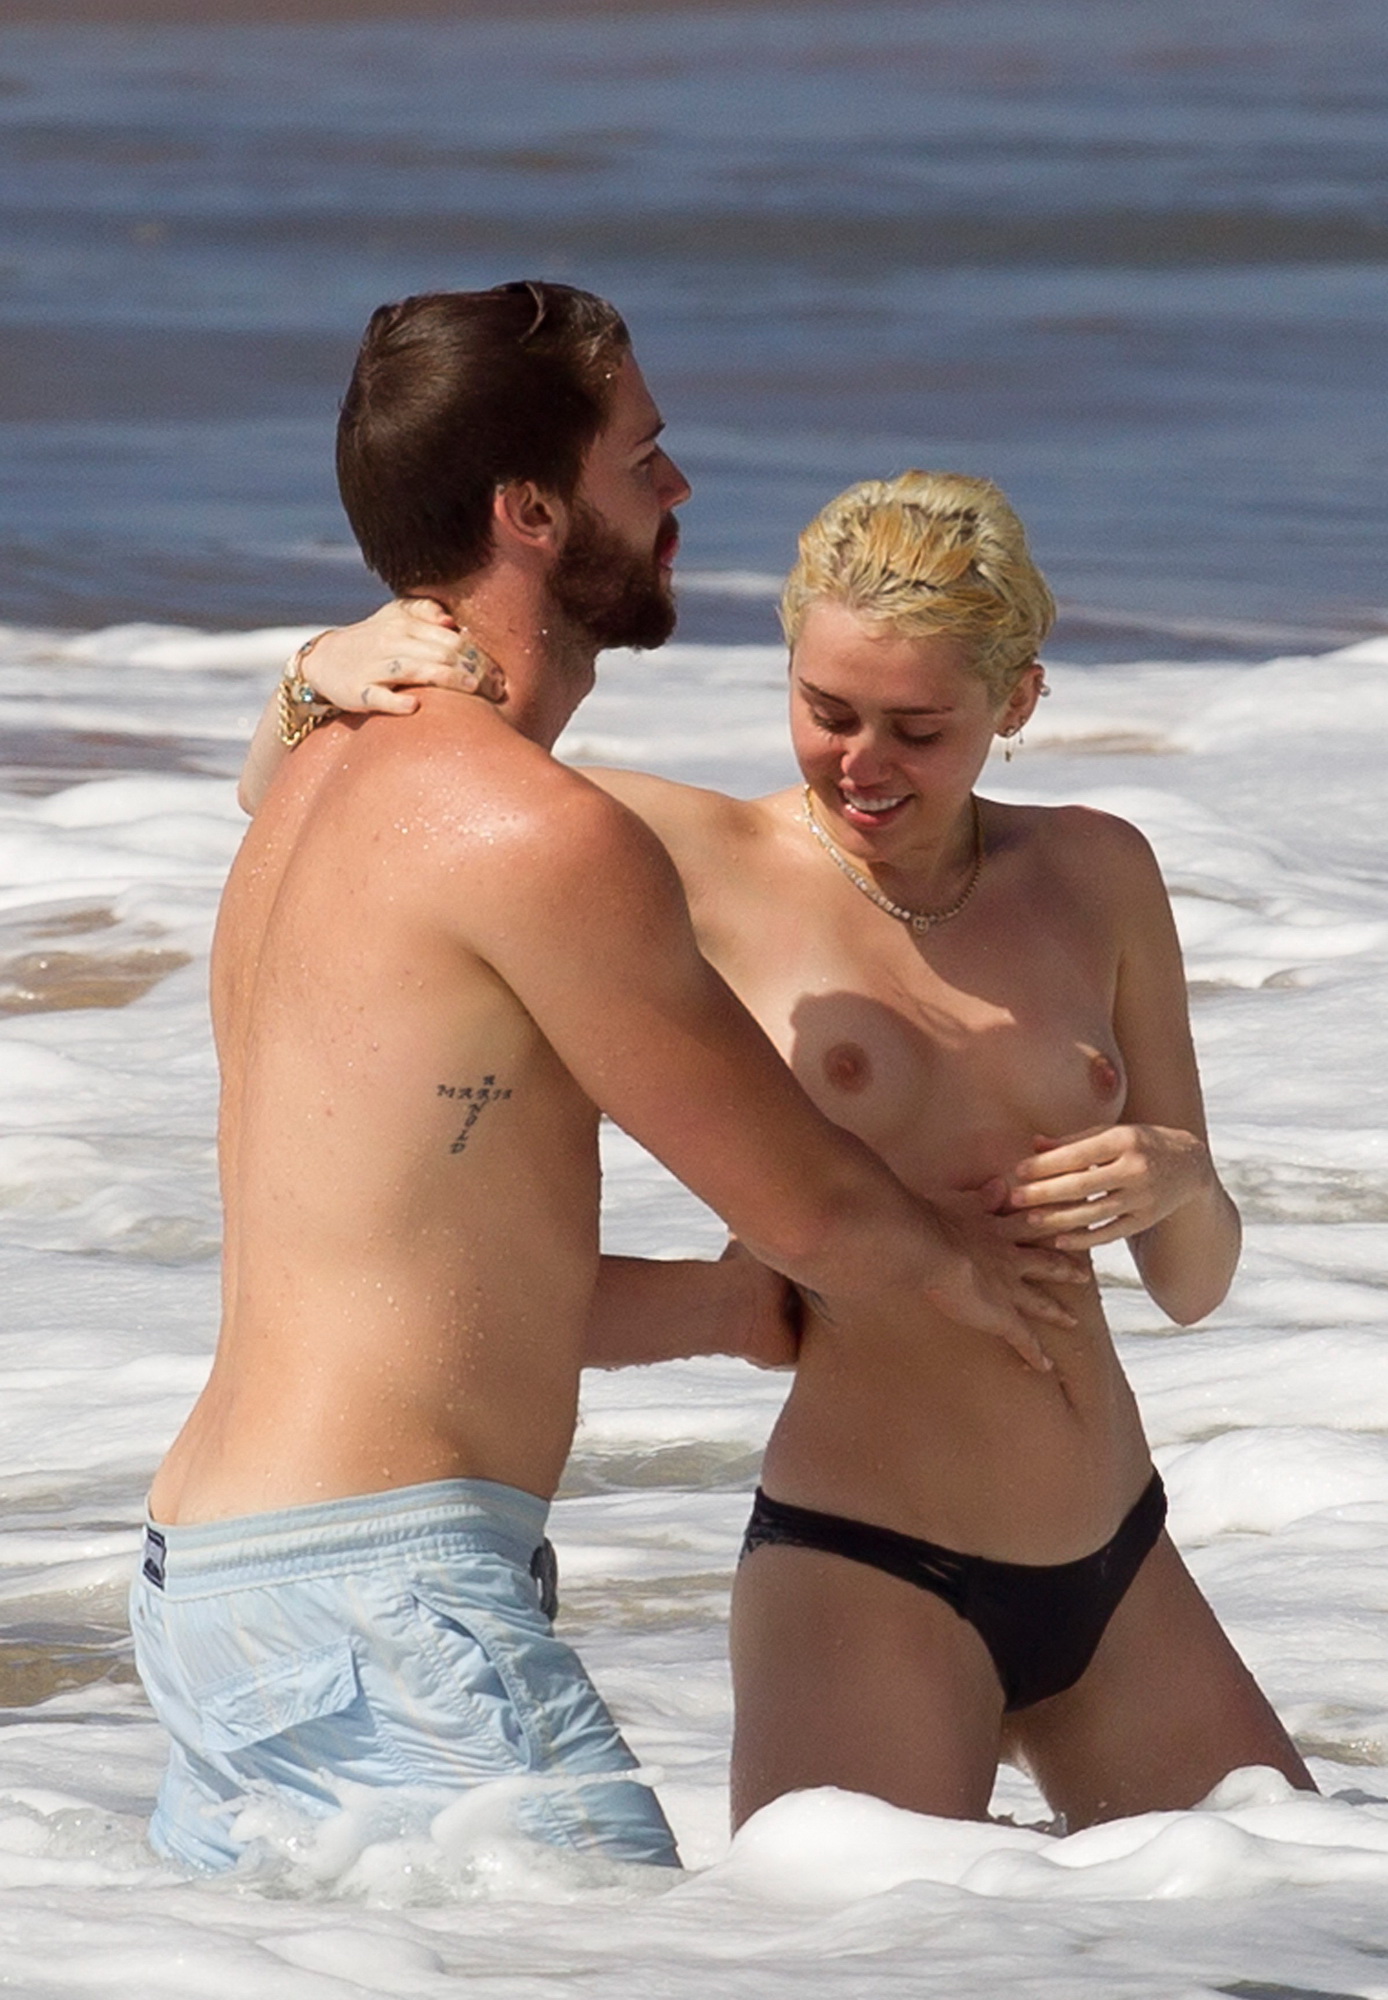 Miley-Cyrus-Topless-On-The-Beach-In-Hawaii-1  Celebrity -1884